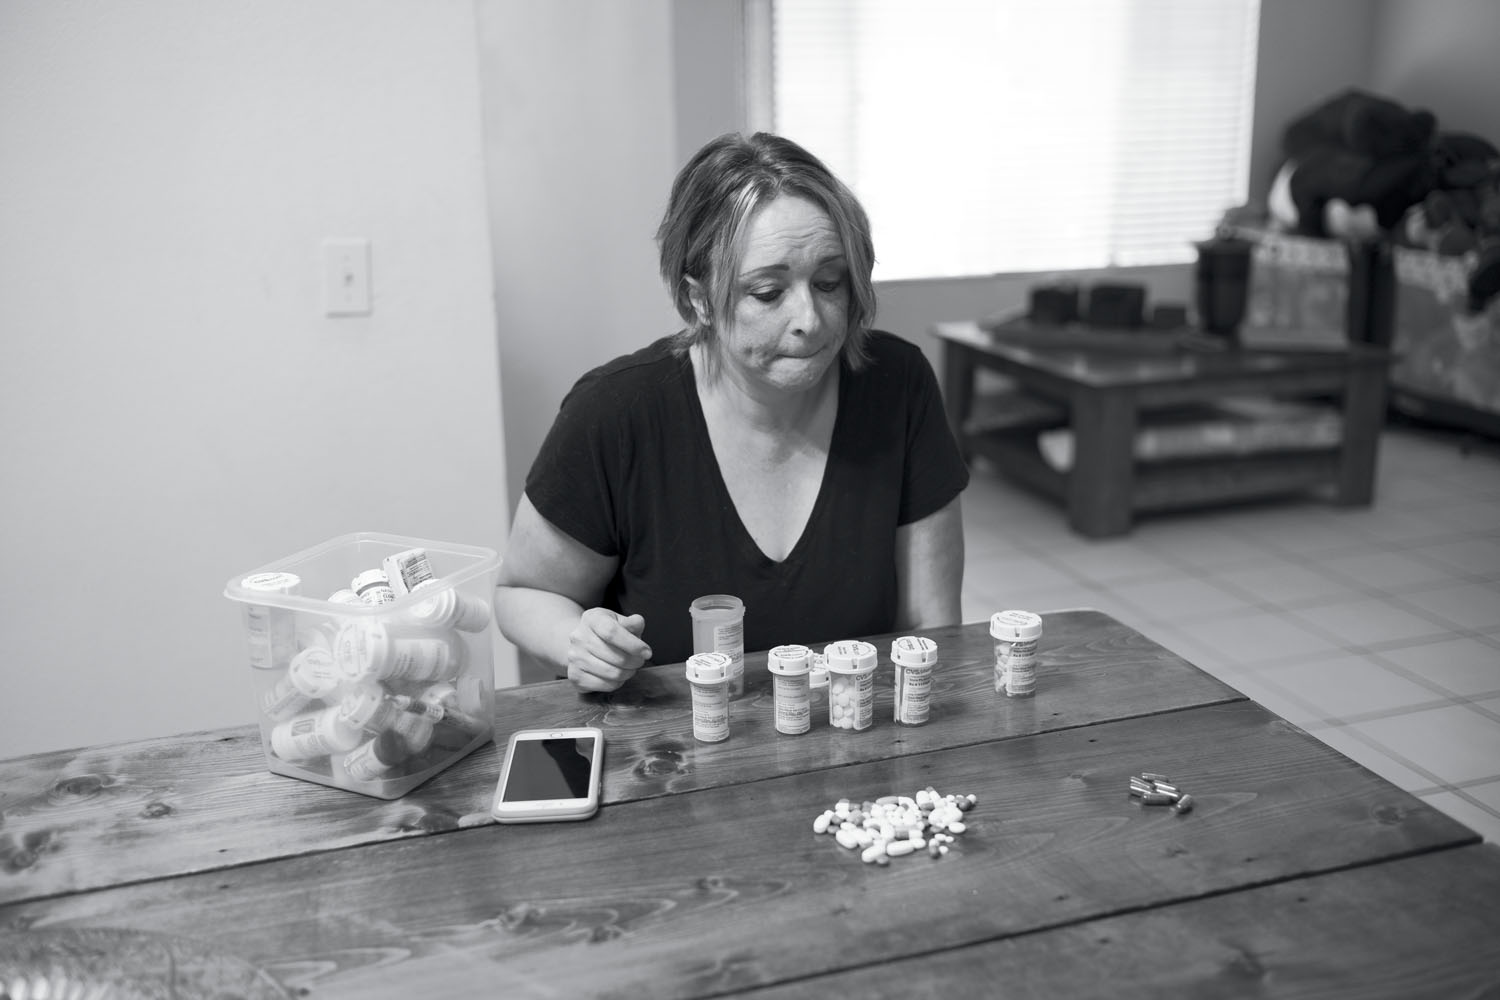 Jenni Mai with medications previously used to treat her sons, Nate and Dylan. Both boys have been diagnosed with severe autism spectrum disorder and Mai has been using cannabis for their treatment since 2017, when Nate’s violence toward her became a daily event. Over time, she weaned Nate off multiple pharmaceuticals in favor of cannabis. Mai helped found WPA4A, an advocacy and support group for families who use cannabis to treat children with autism. San Bernardino, CA, August 2018.